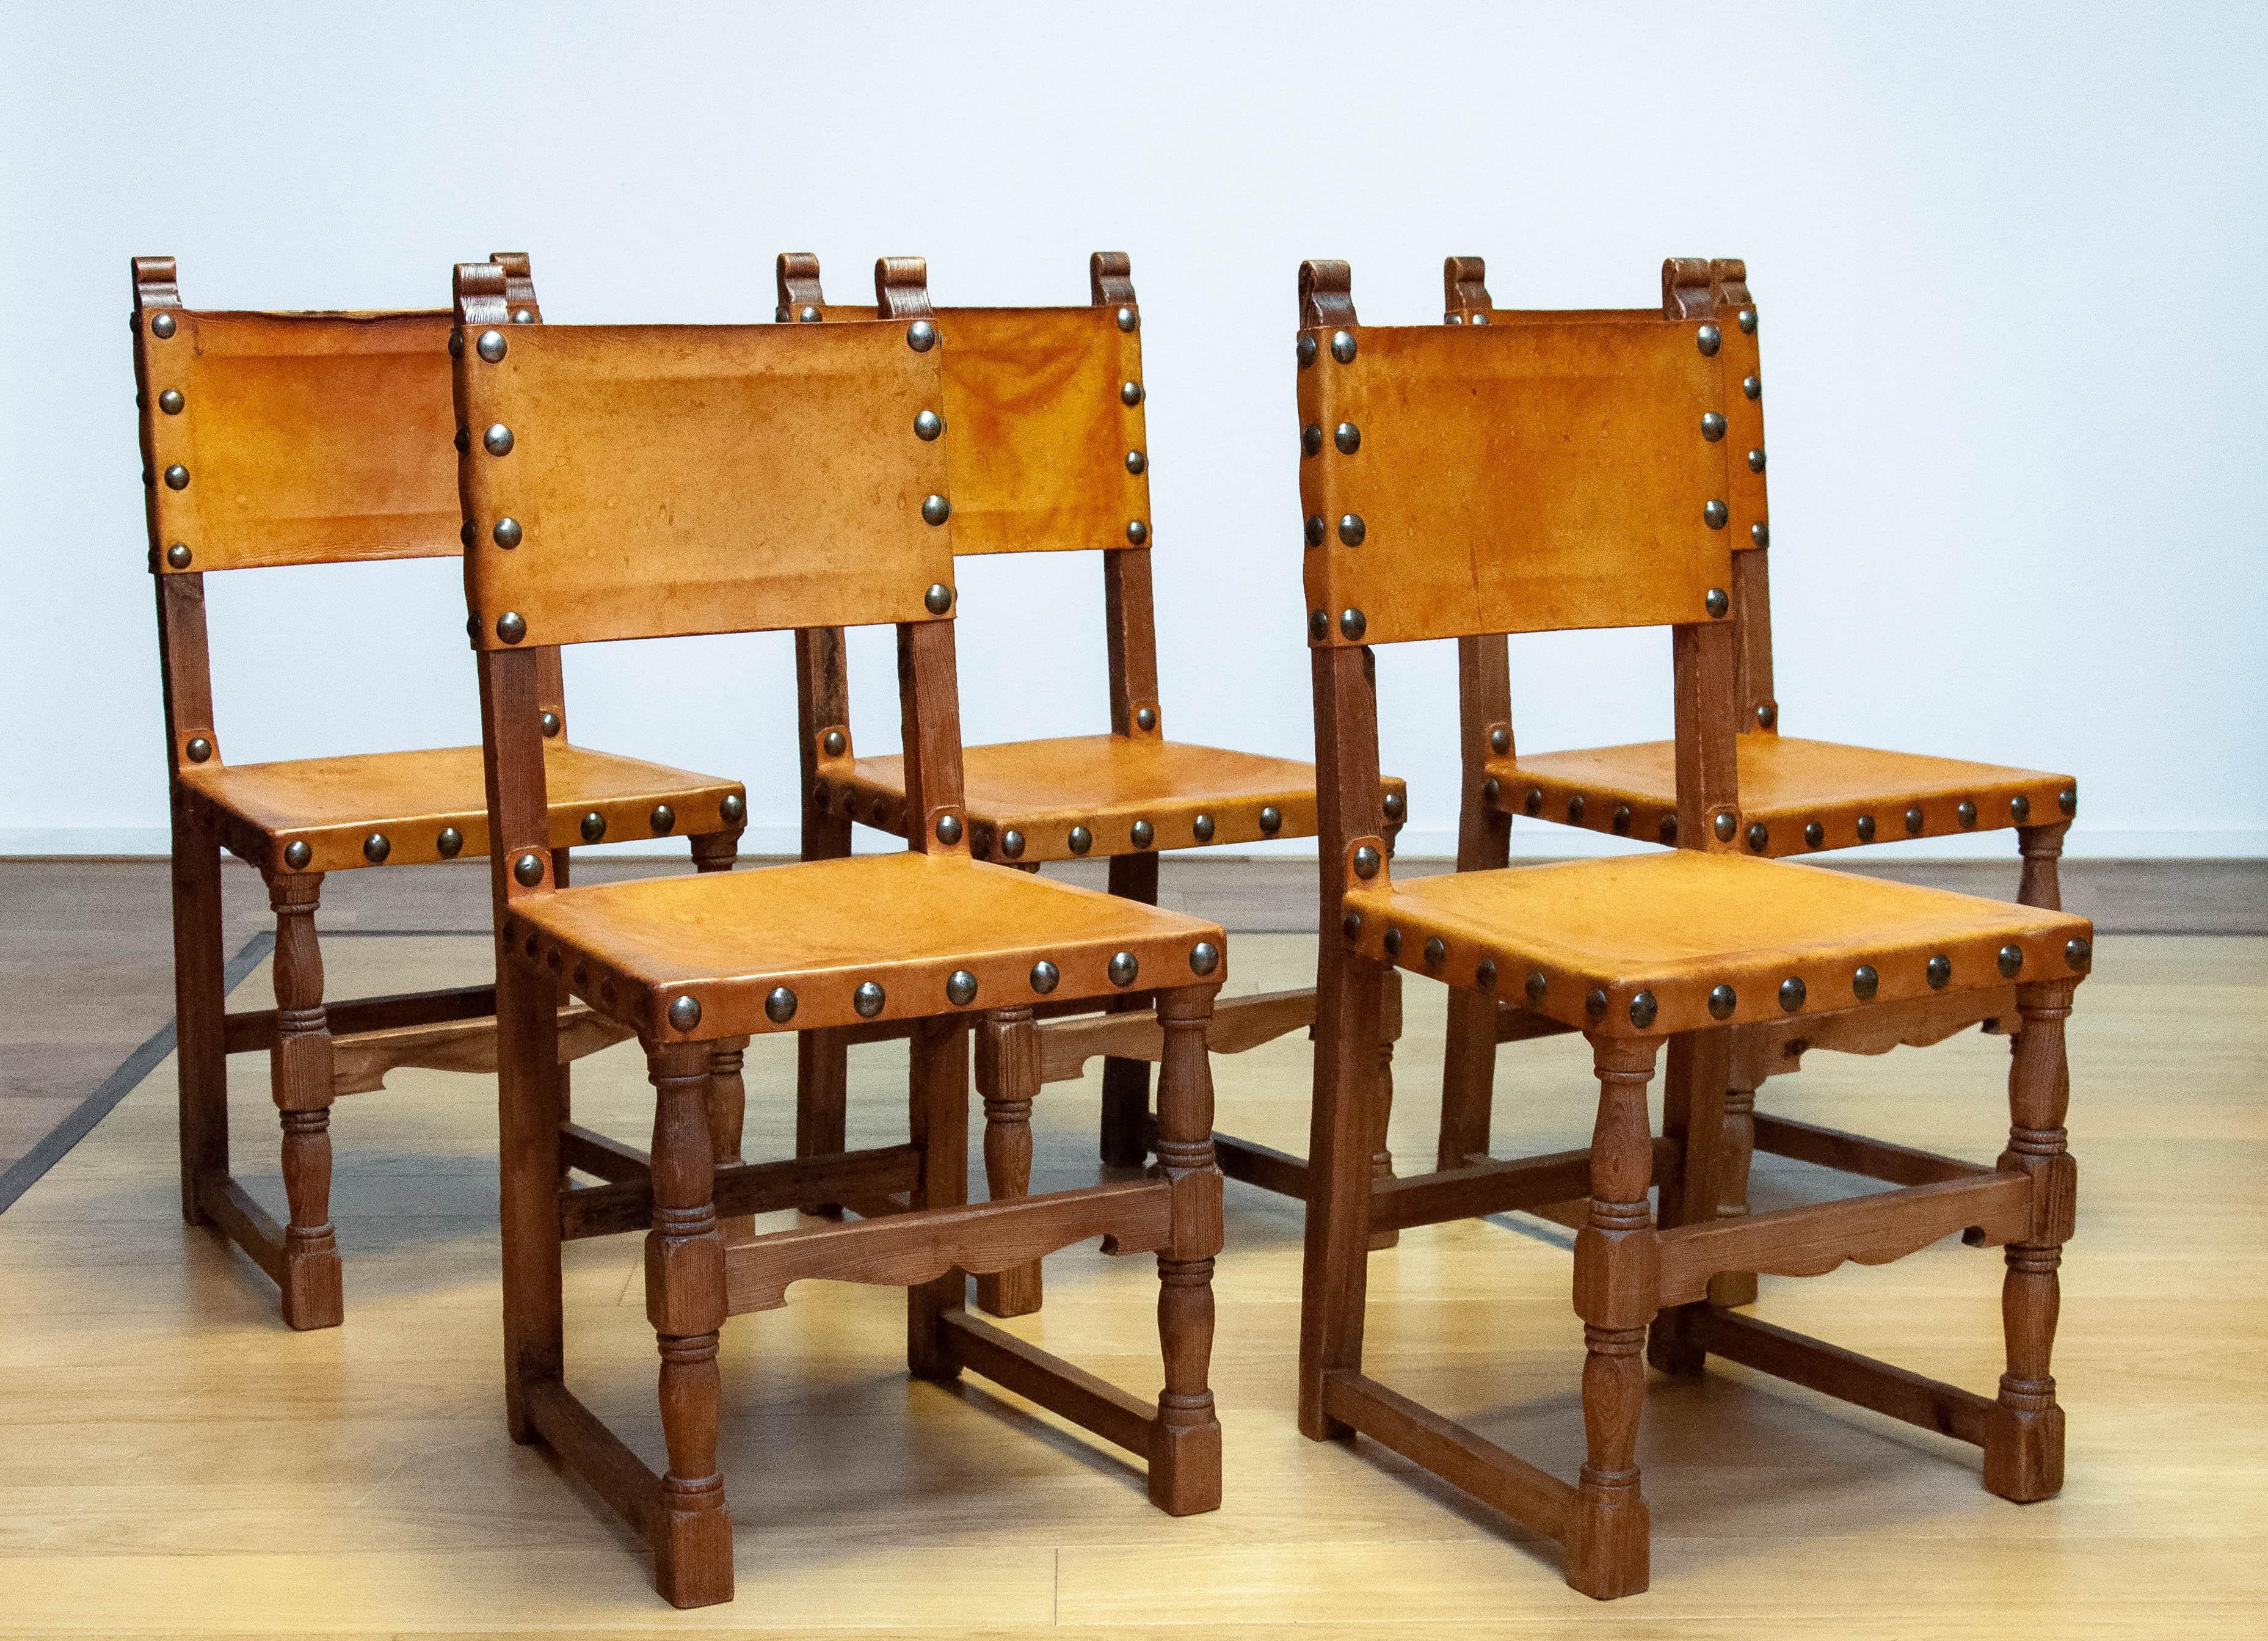 6 Antique Swedish Folk Art Farm County Dining Chairs In Pine And Tan Leather For Sale 3